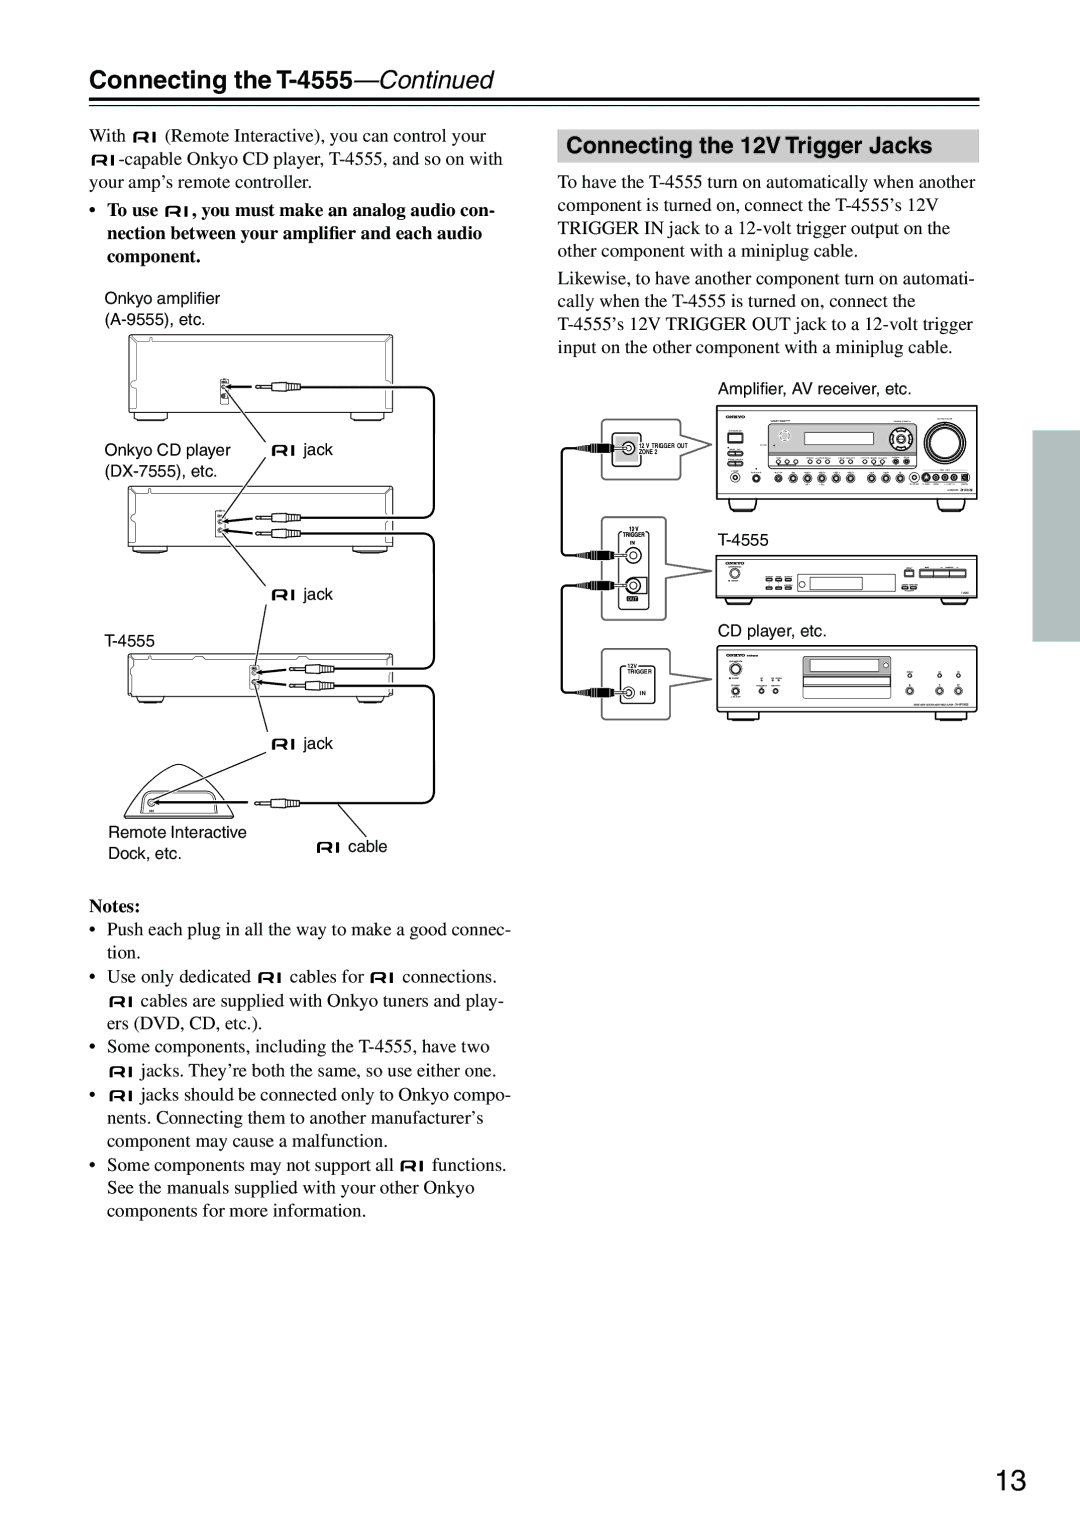 Onkyo instruction manual Connecting the T-4555, Connecting the 12V Trigger Jacks 